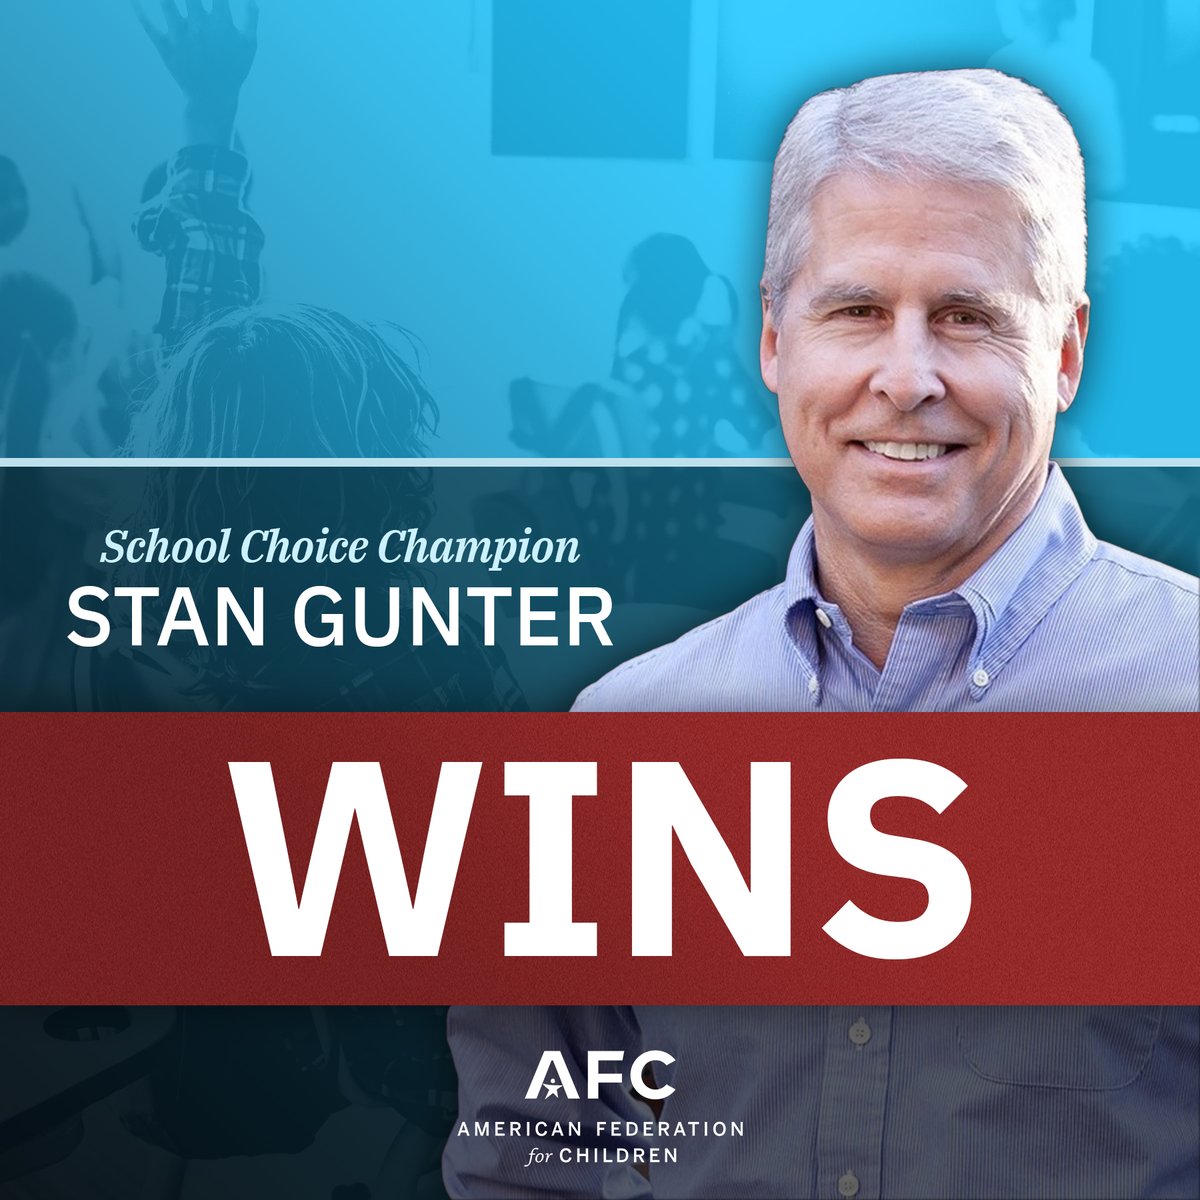 Congratulations to school choice champion Stan Gunter for his primary victory in Georgia tonight!